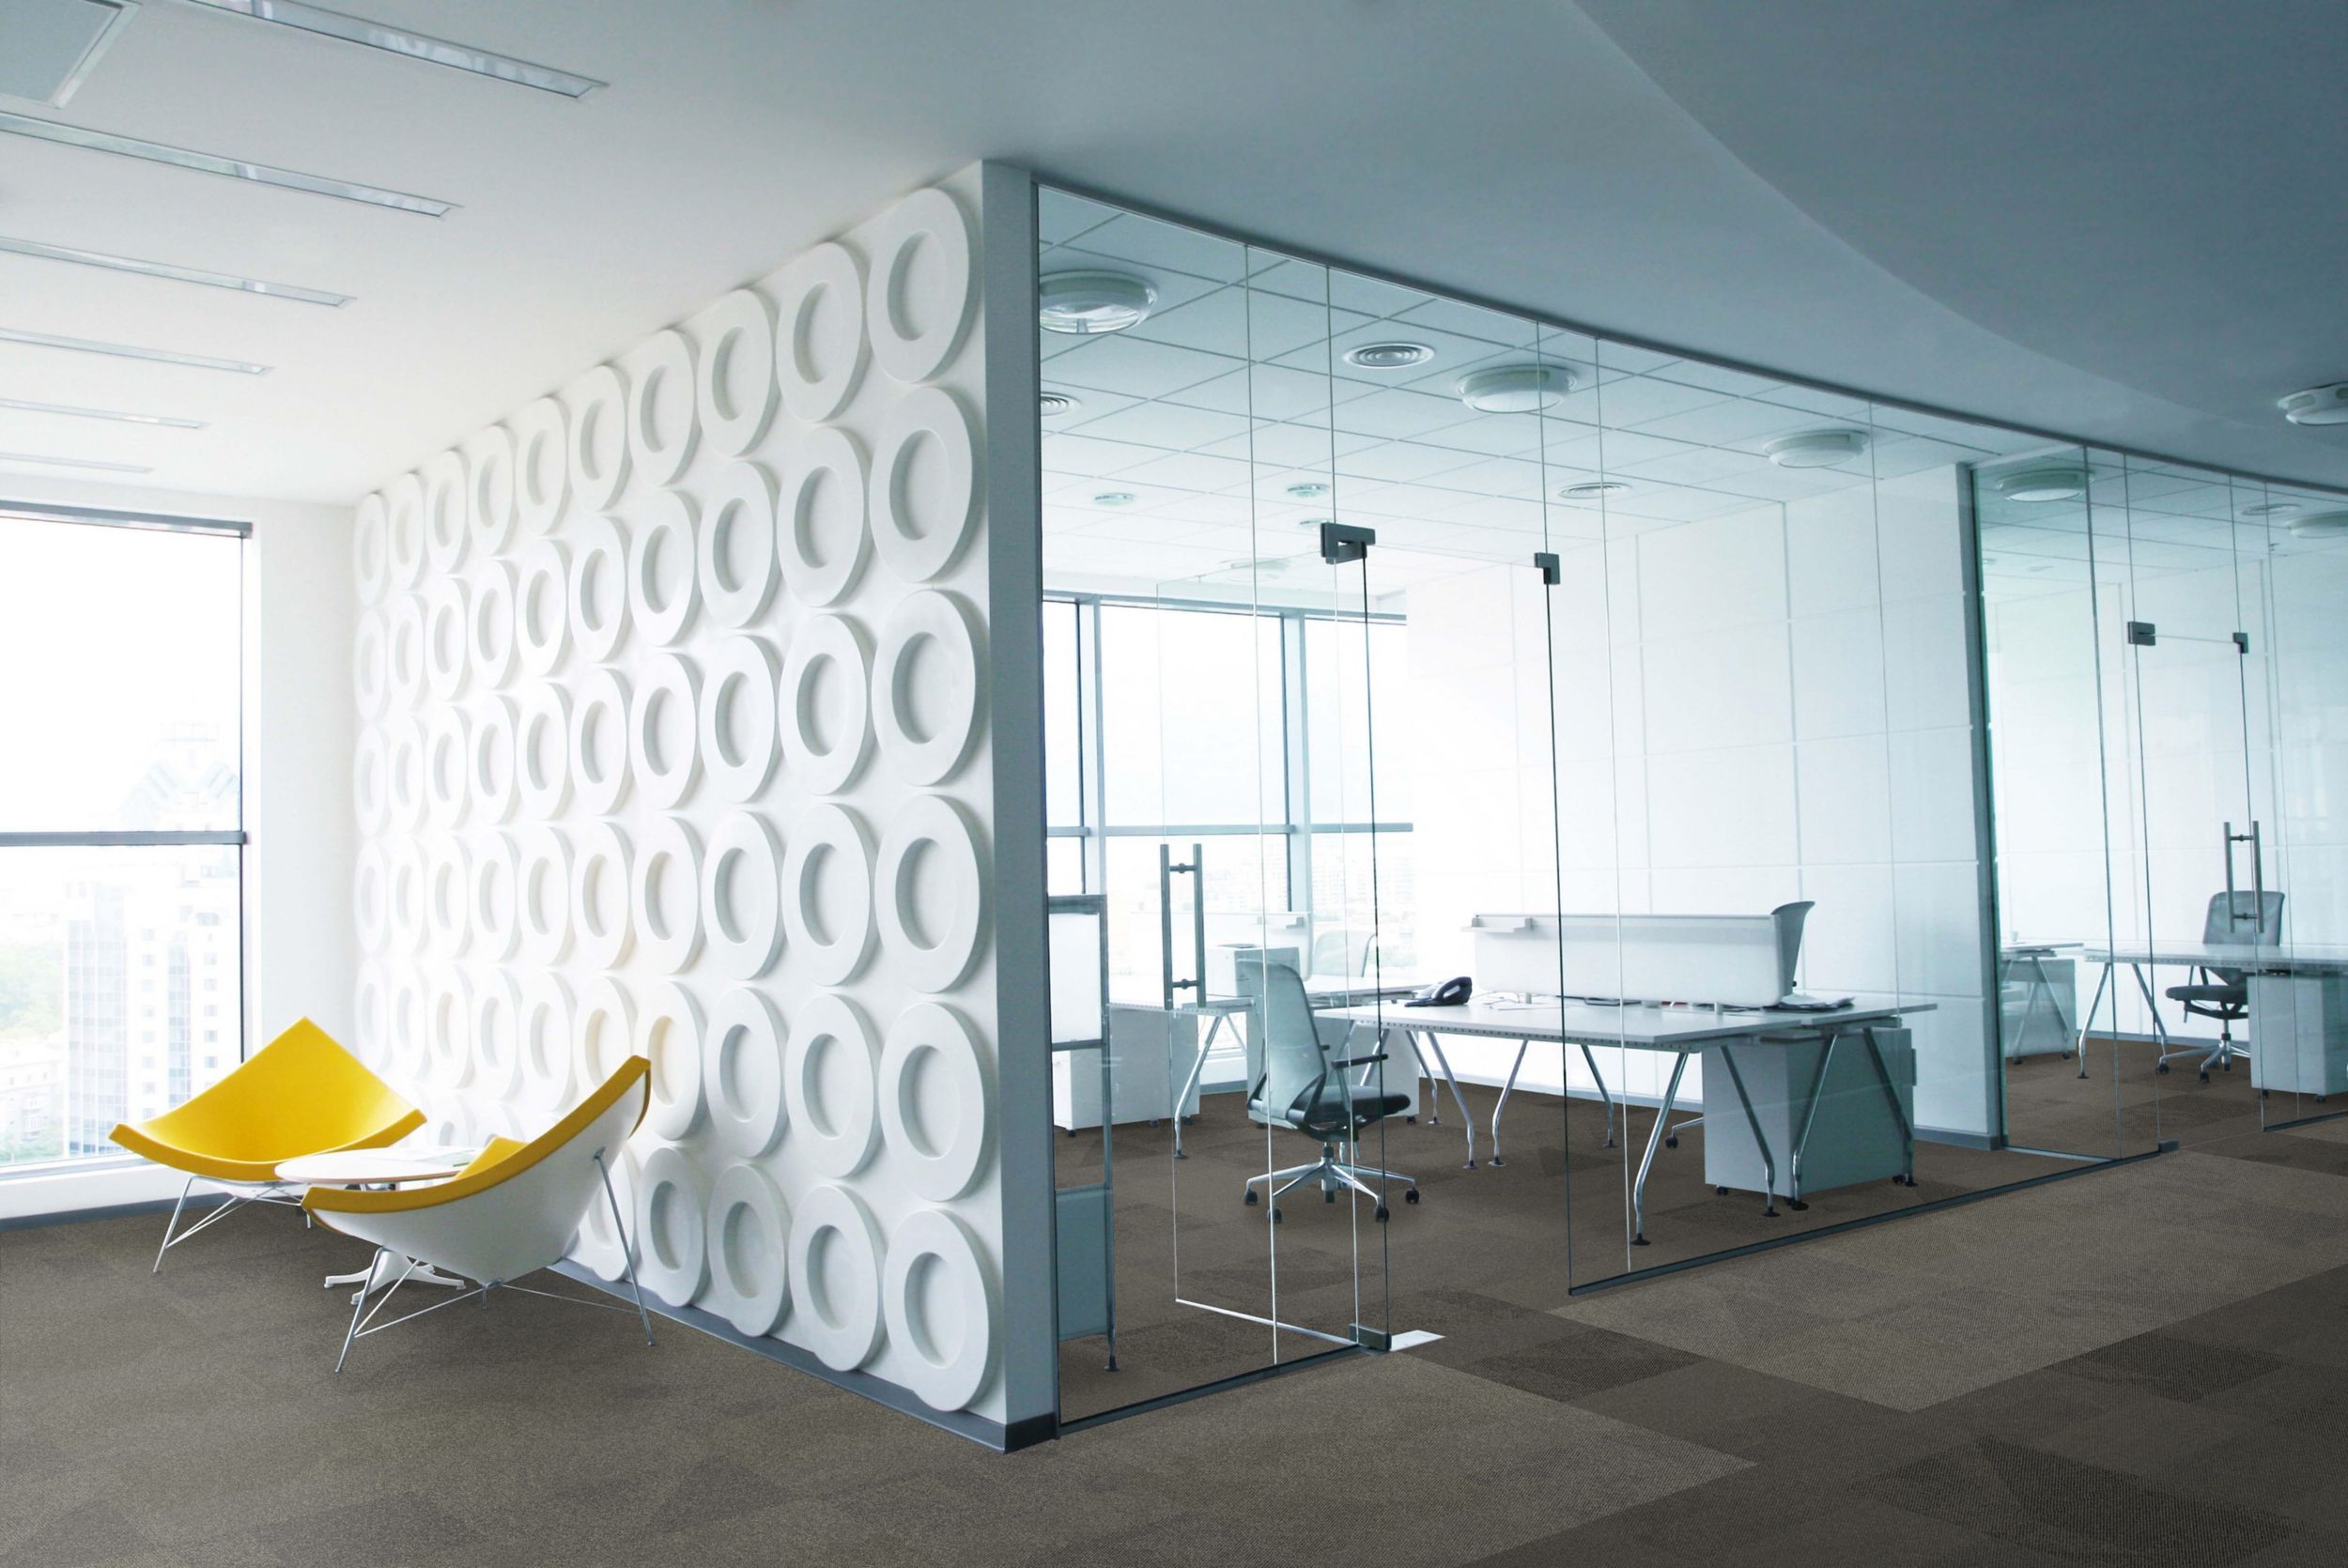 Interface Paver carpet tile in meeting room and corridor with two yellow chairs and patterned white wall número de imagen 5